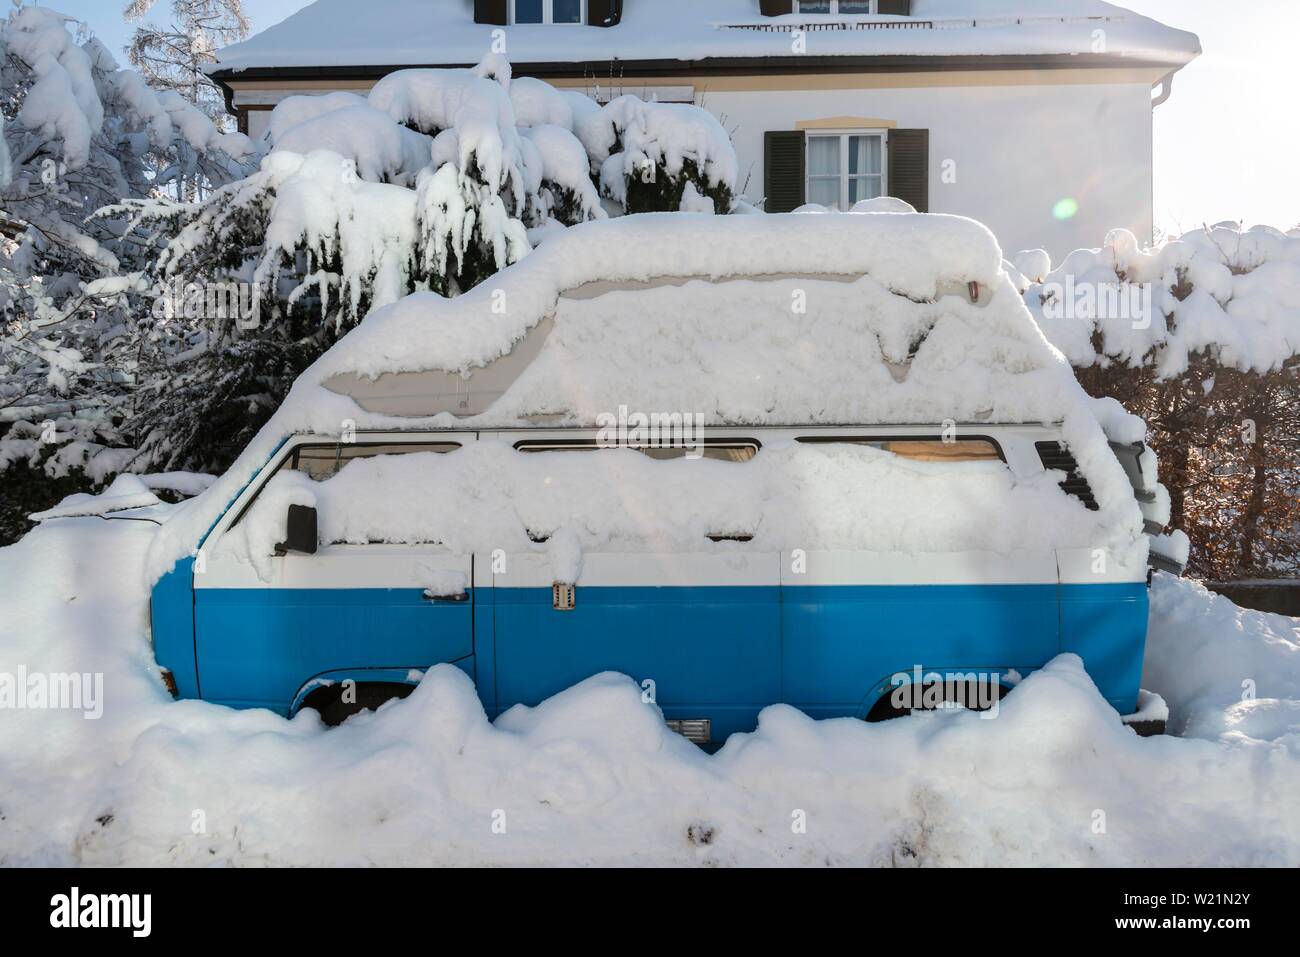 Snow-covered parking car in the residential area, VW Bus T3, Munich, Upper Bavaria, Bavaria, Germany Stock Photo